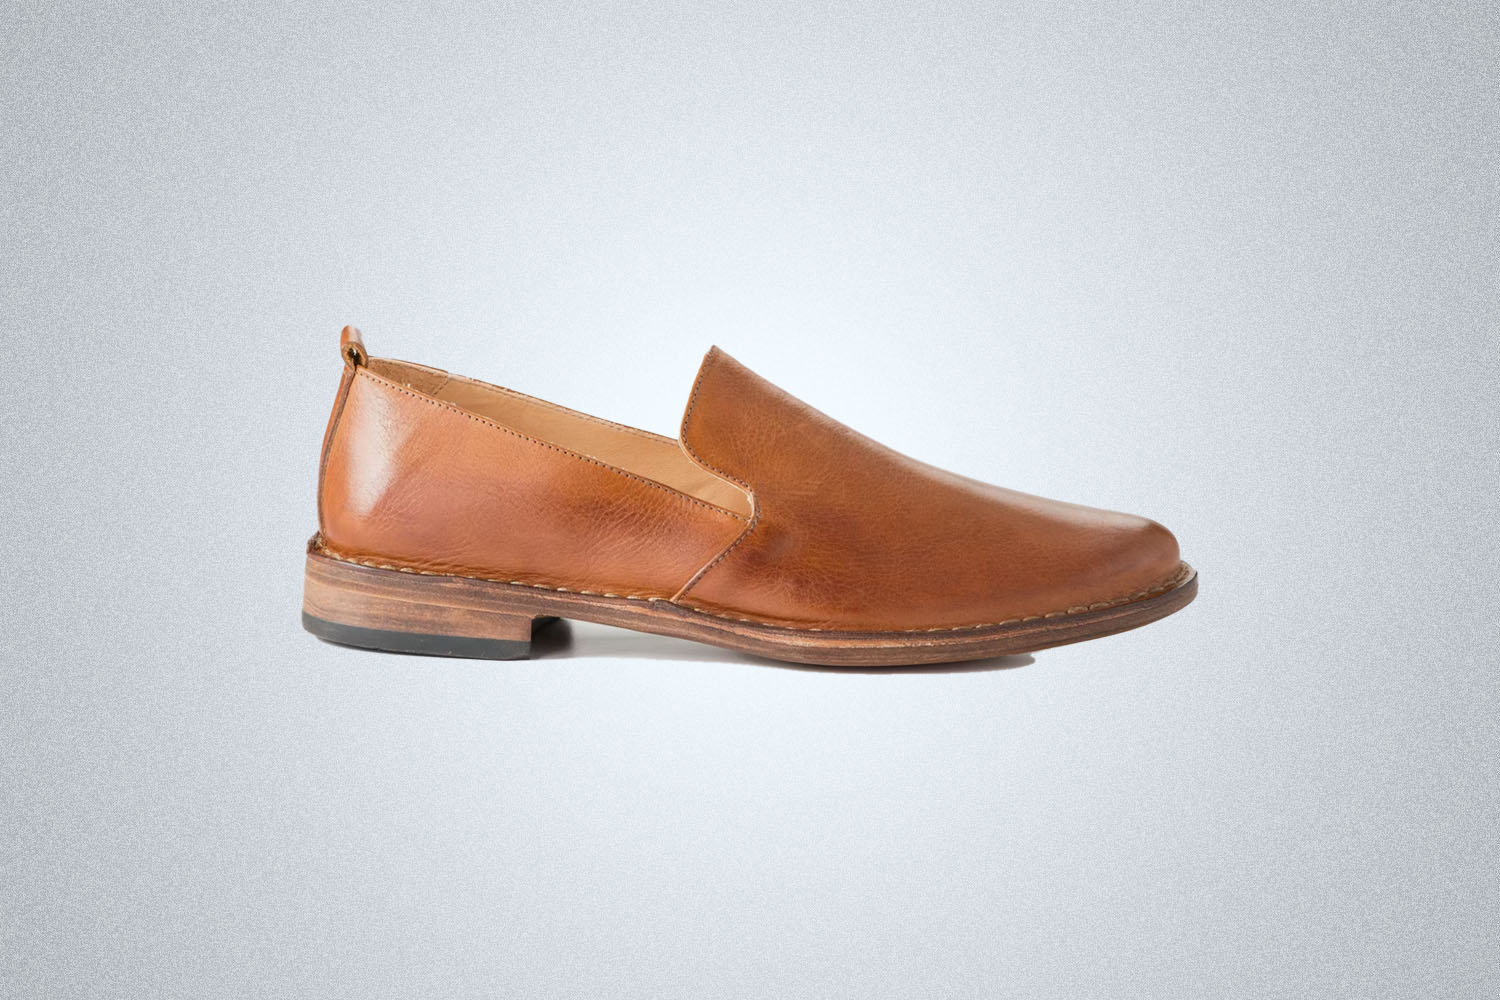 A pair of loafers from Astorflex on a grey background